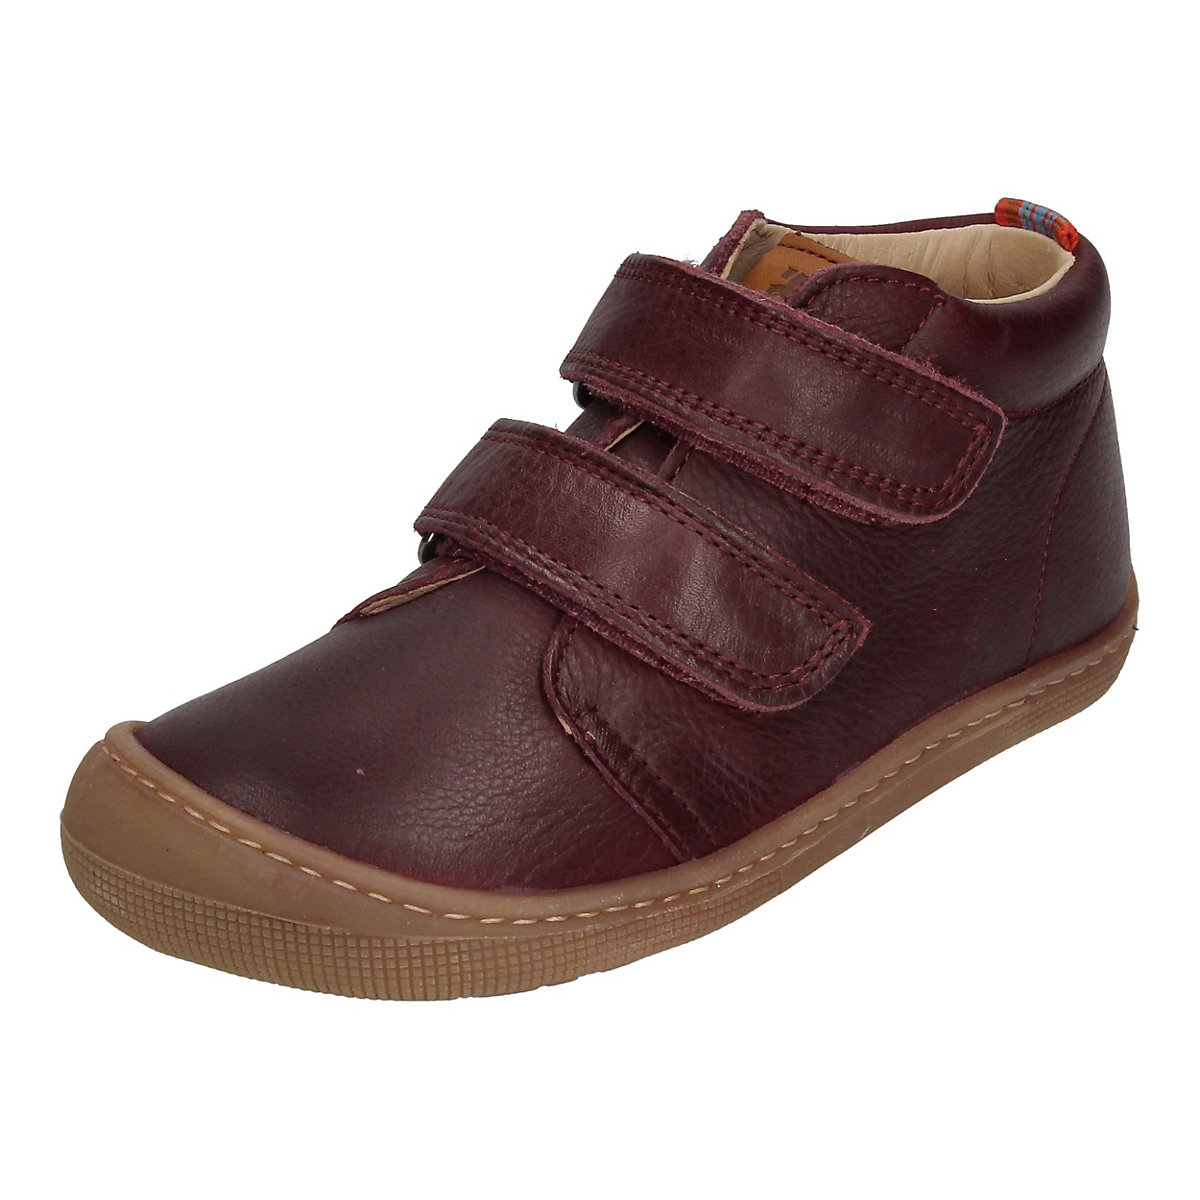 KOEL DON NAPPA Sneakers High für Kinder rot